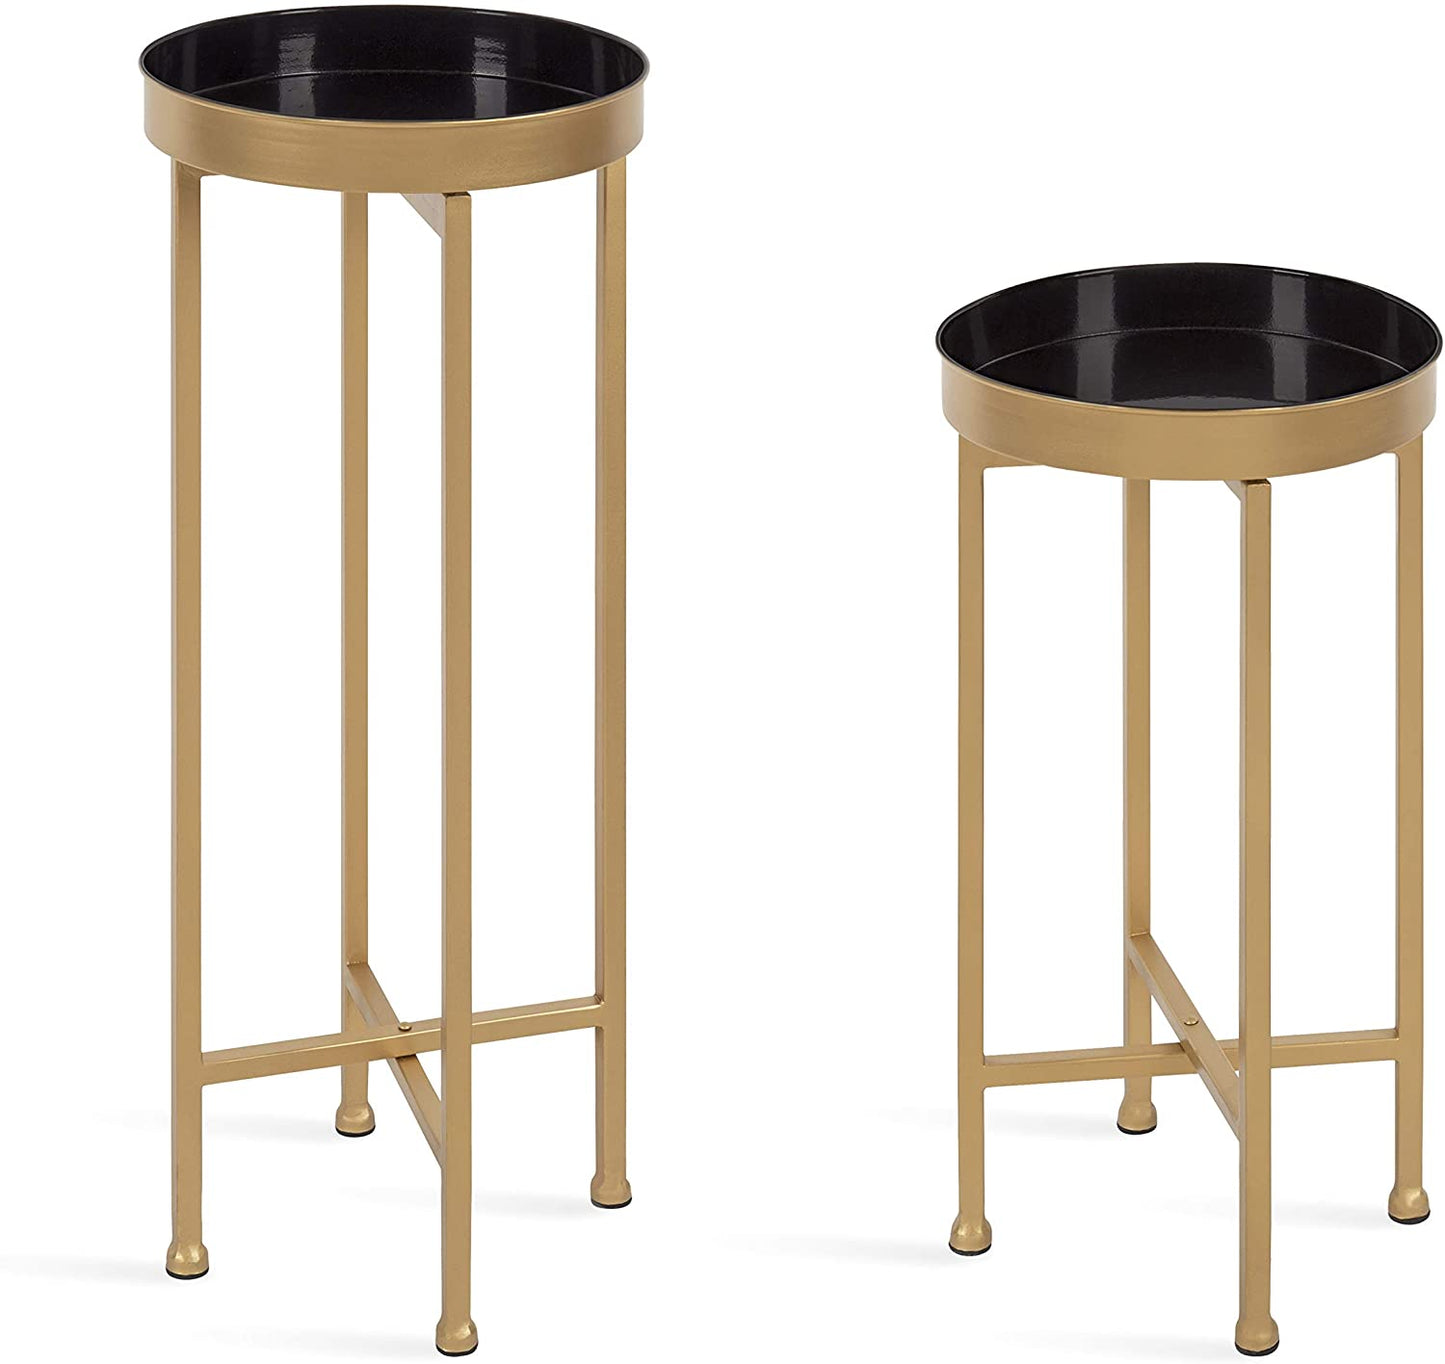 Nest Of Tables: Set of 2, Gold and Black, Decorative Modern Glam End Table